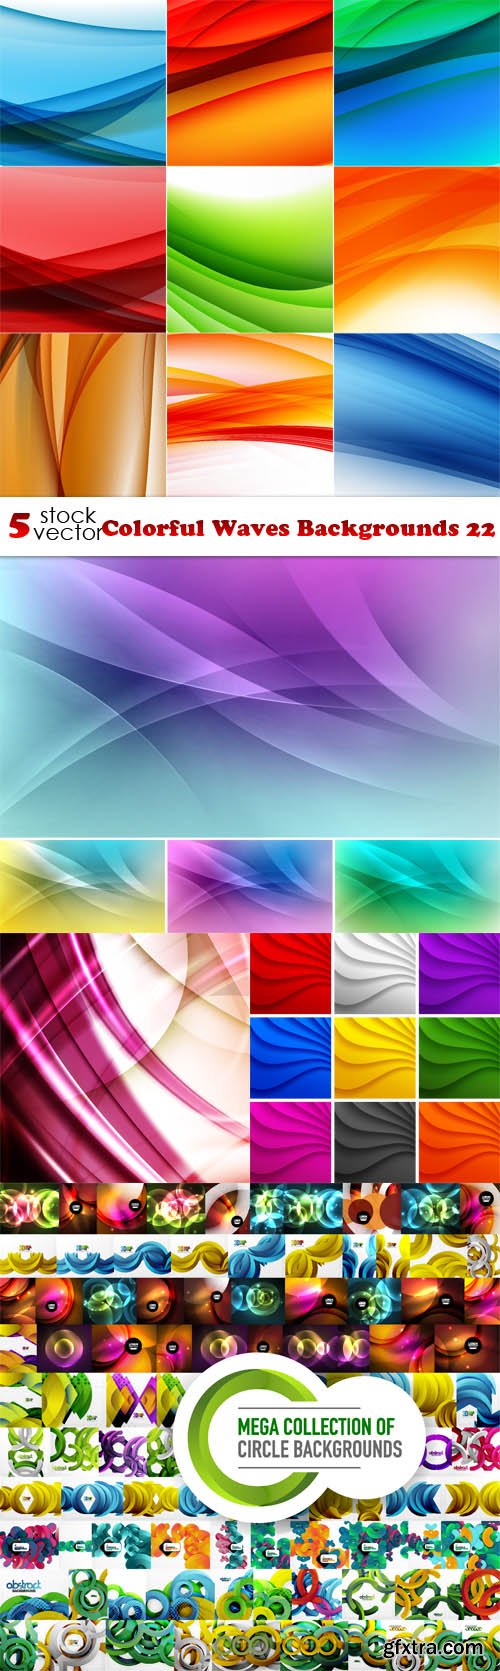 Vectors - Colorful Waves Backgrounds 22